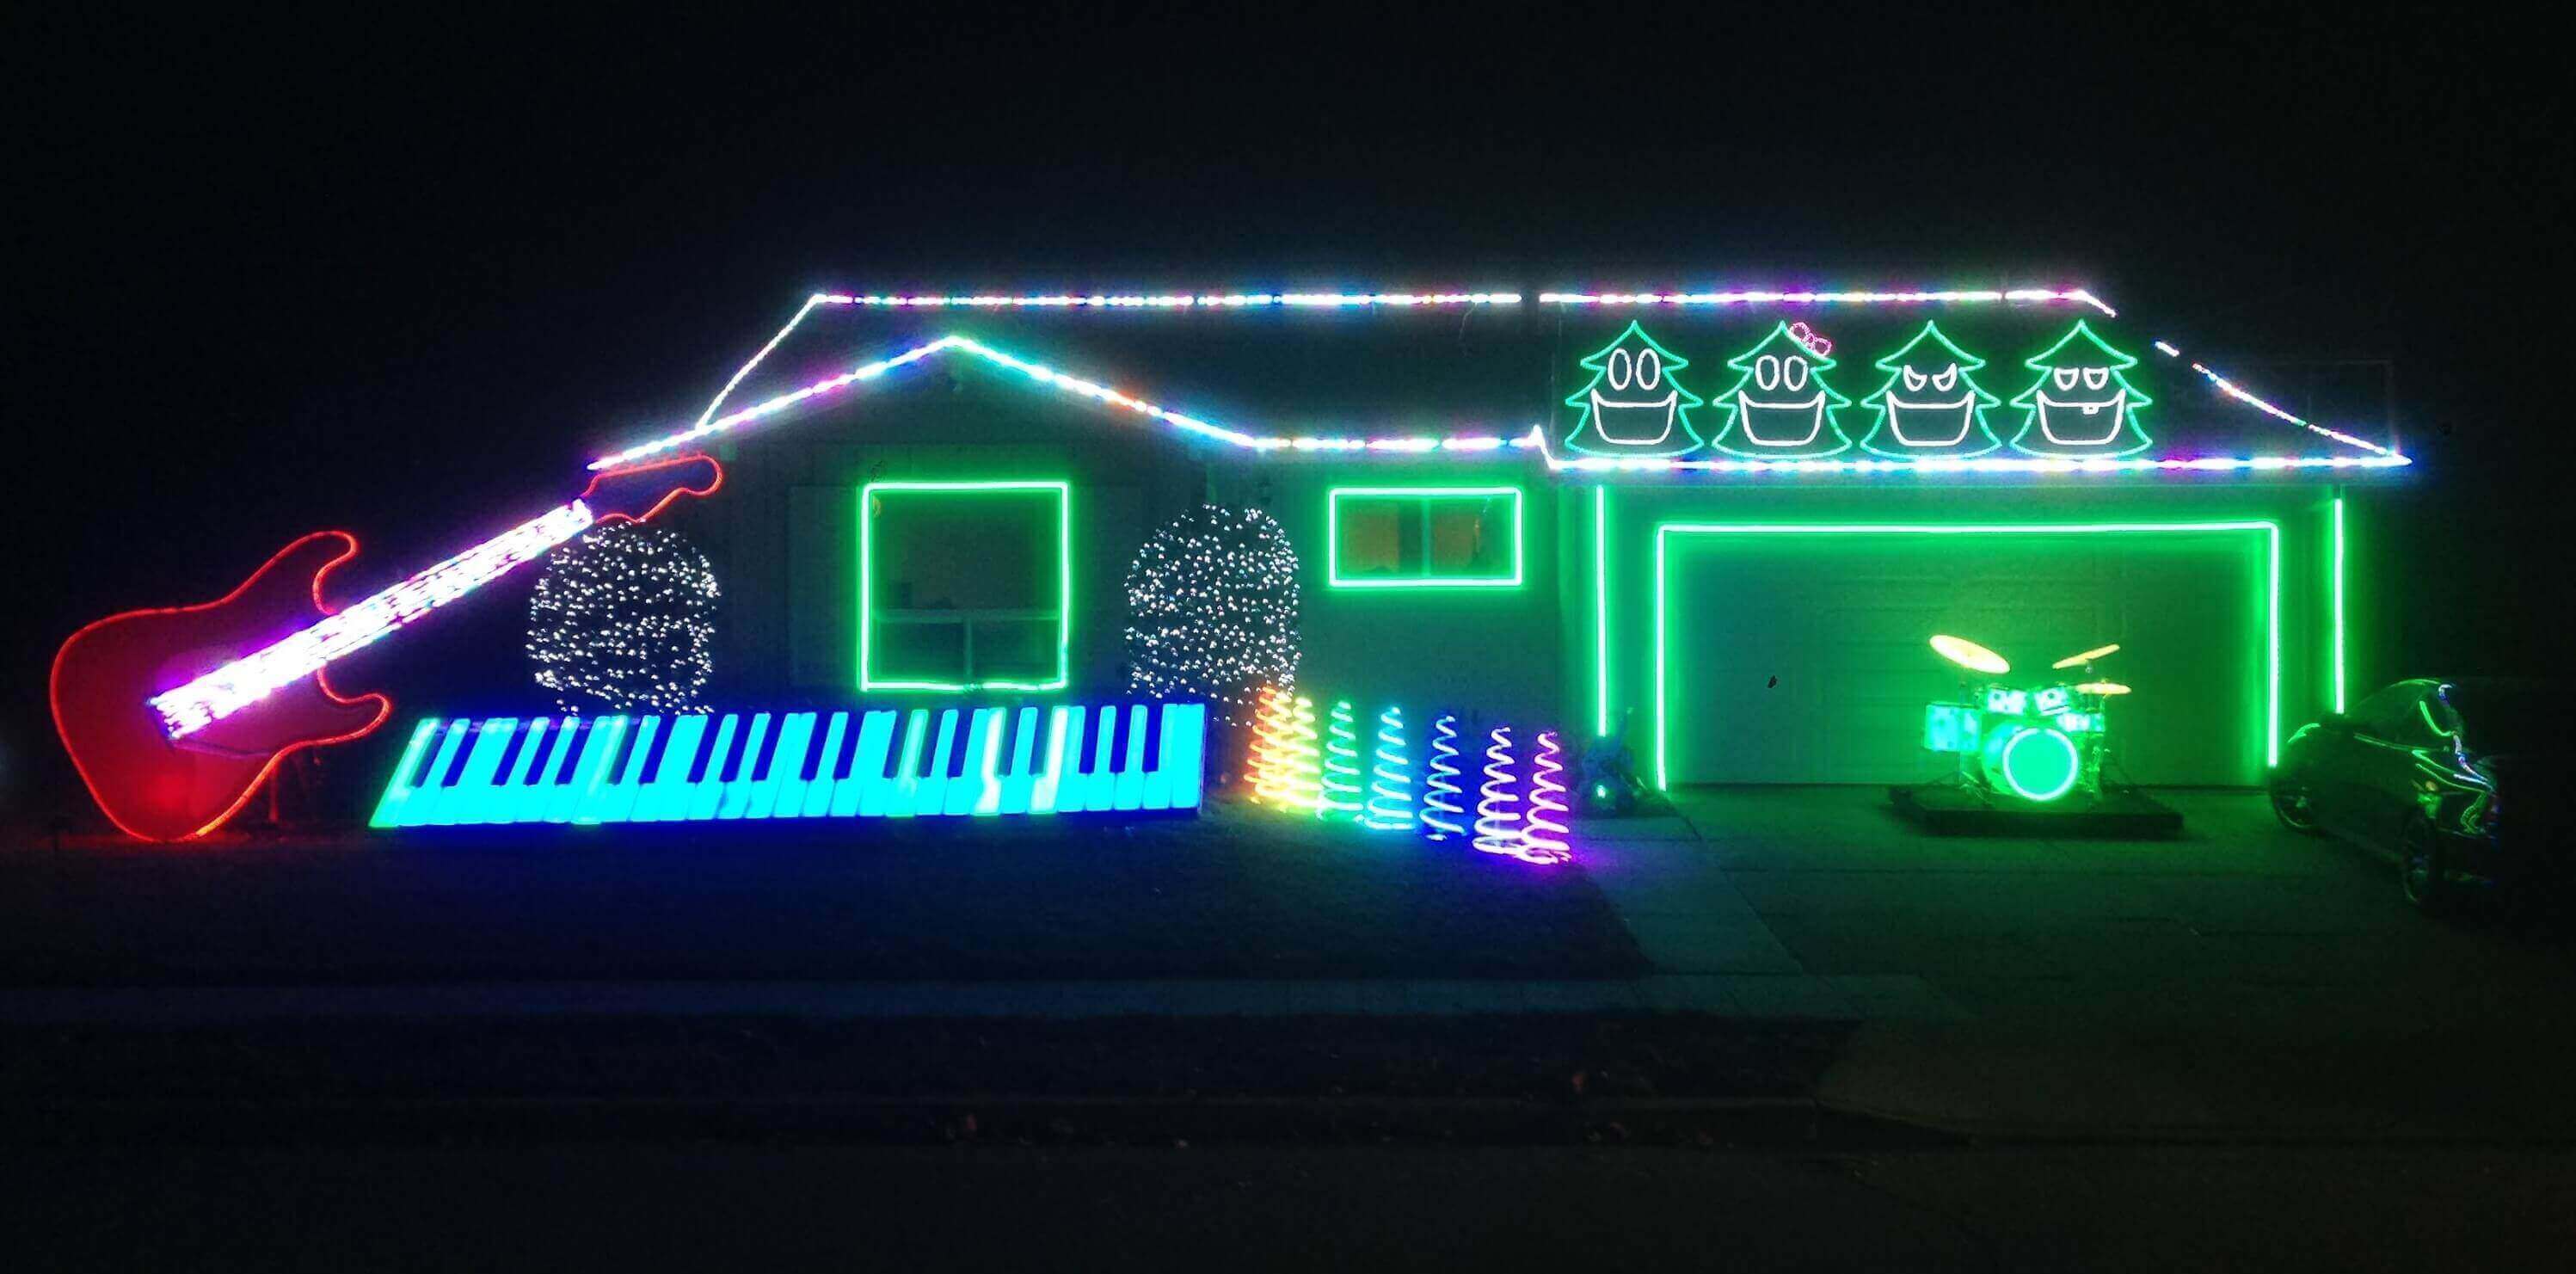 The best rock n' roll and heavy metal Christmas decorations